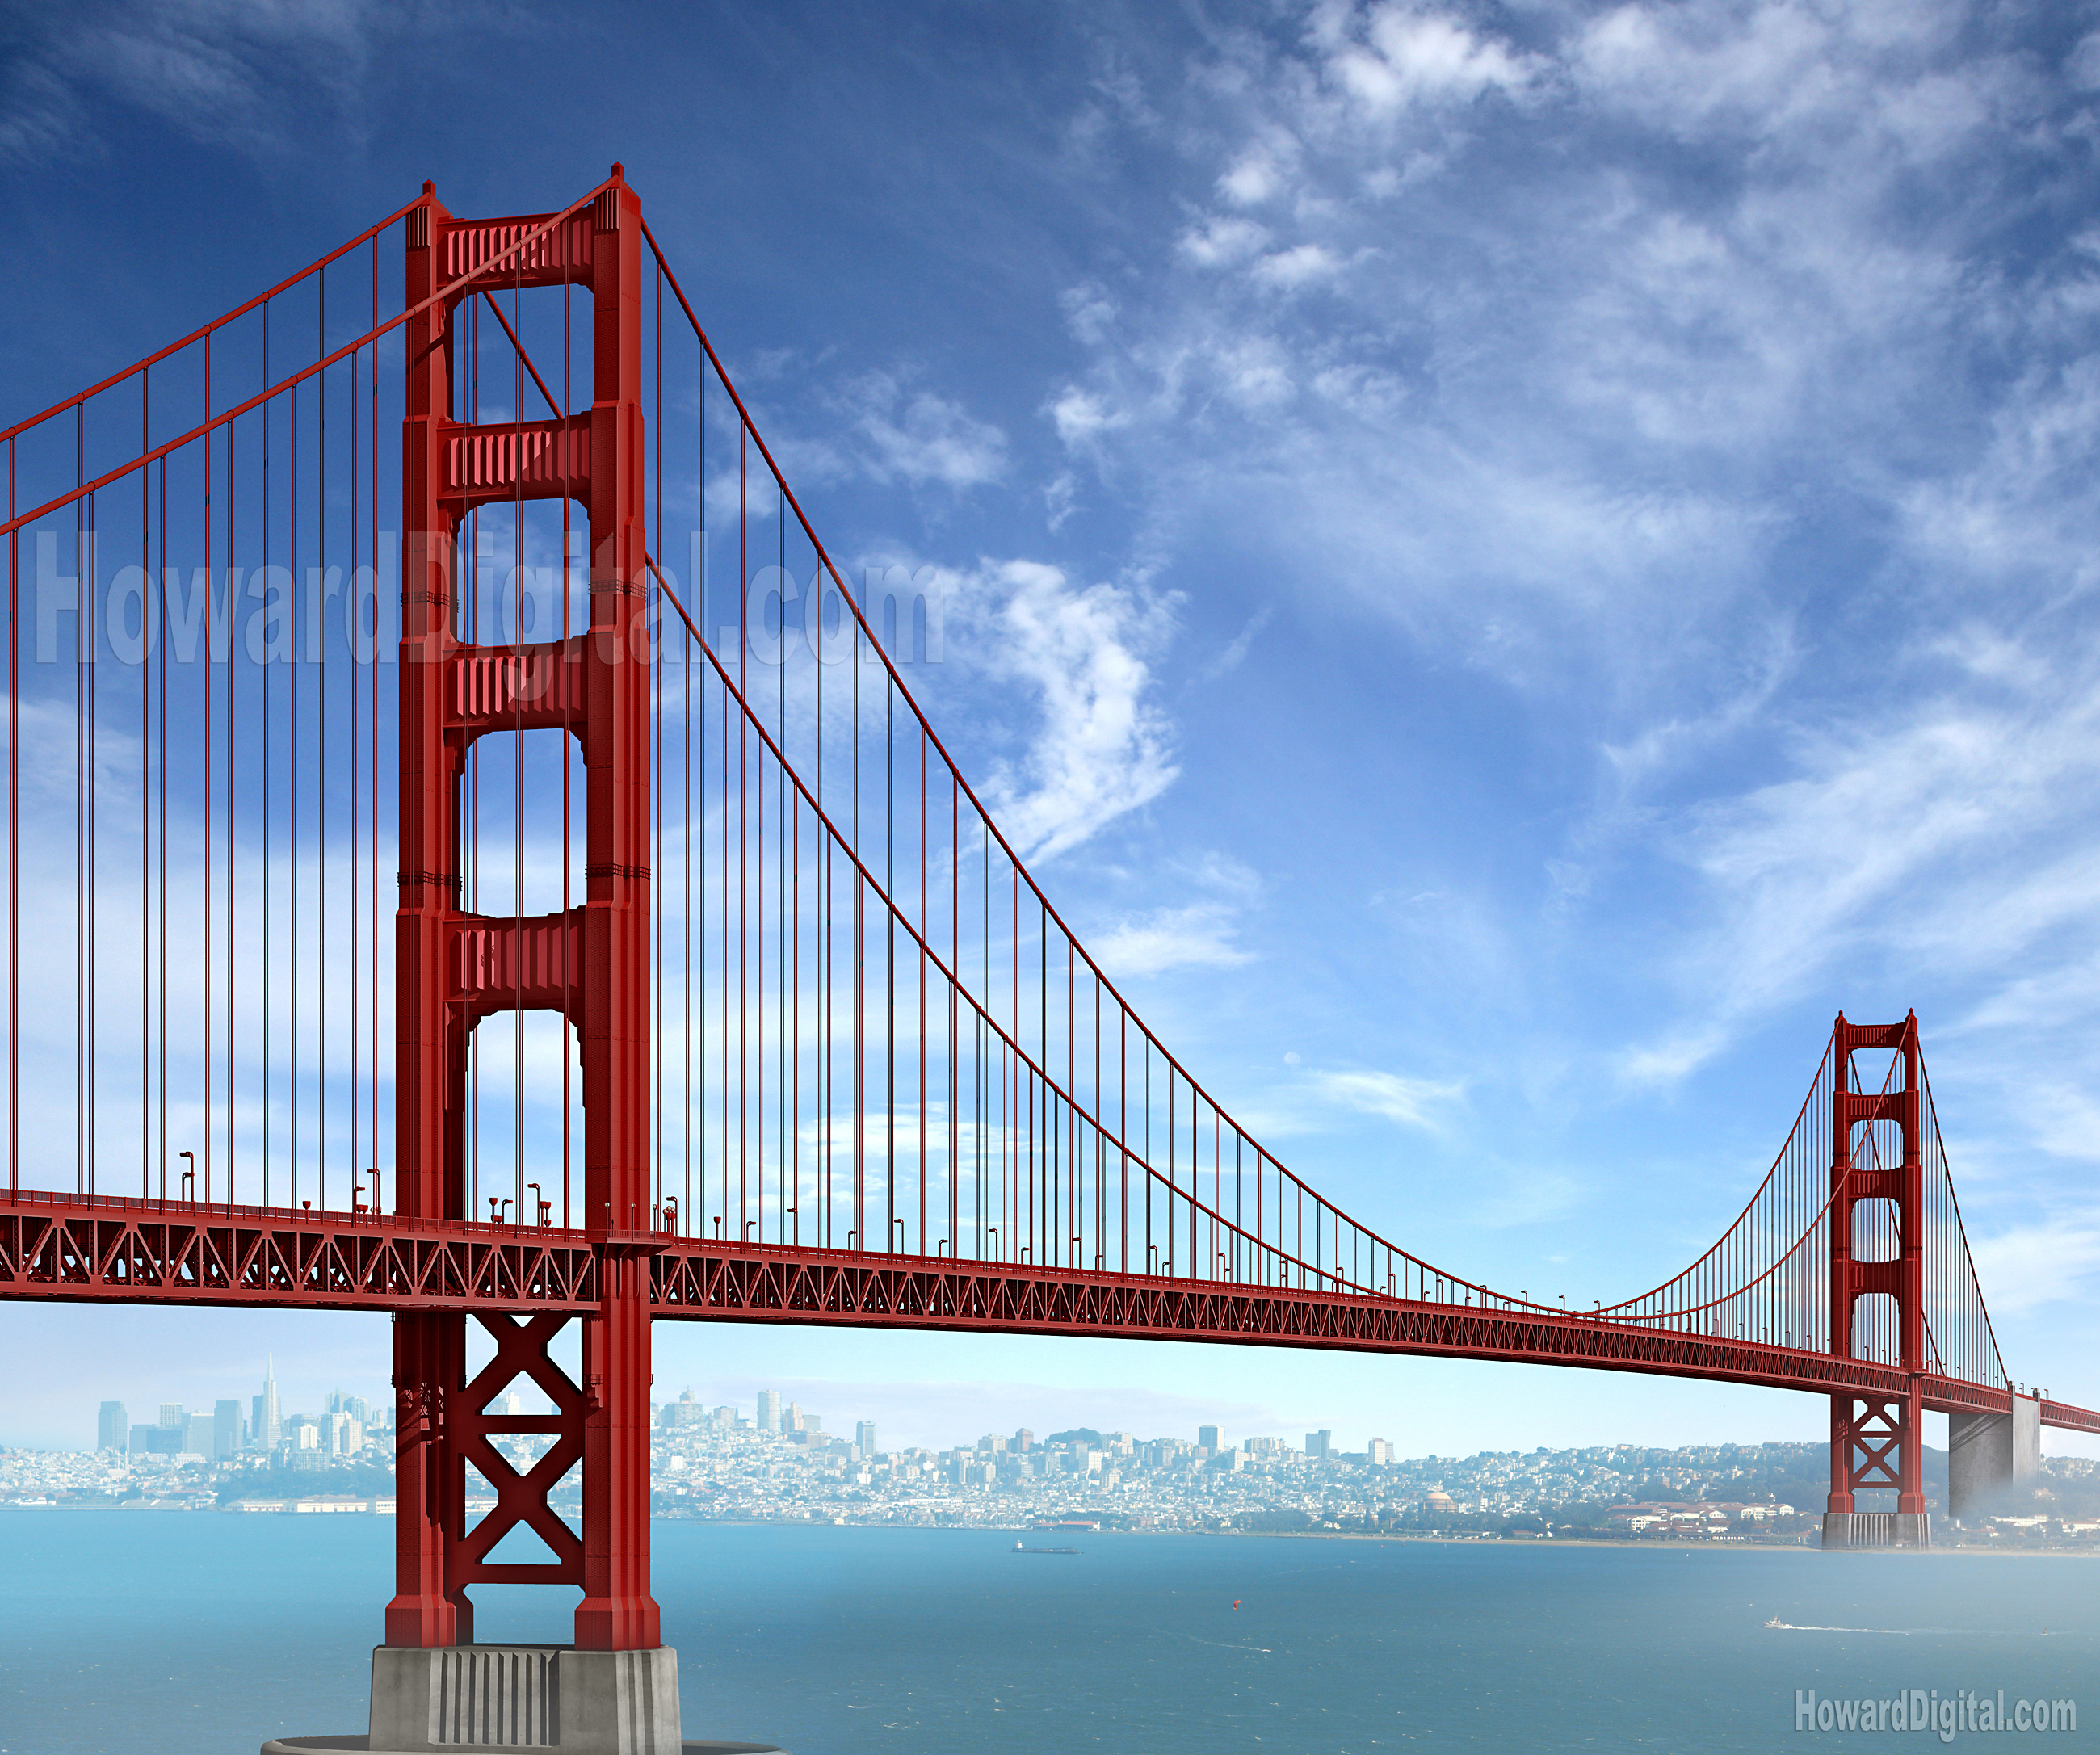 What Do You Think About The Golden Gate Bridge  Leave Your Thoughts